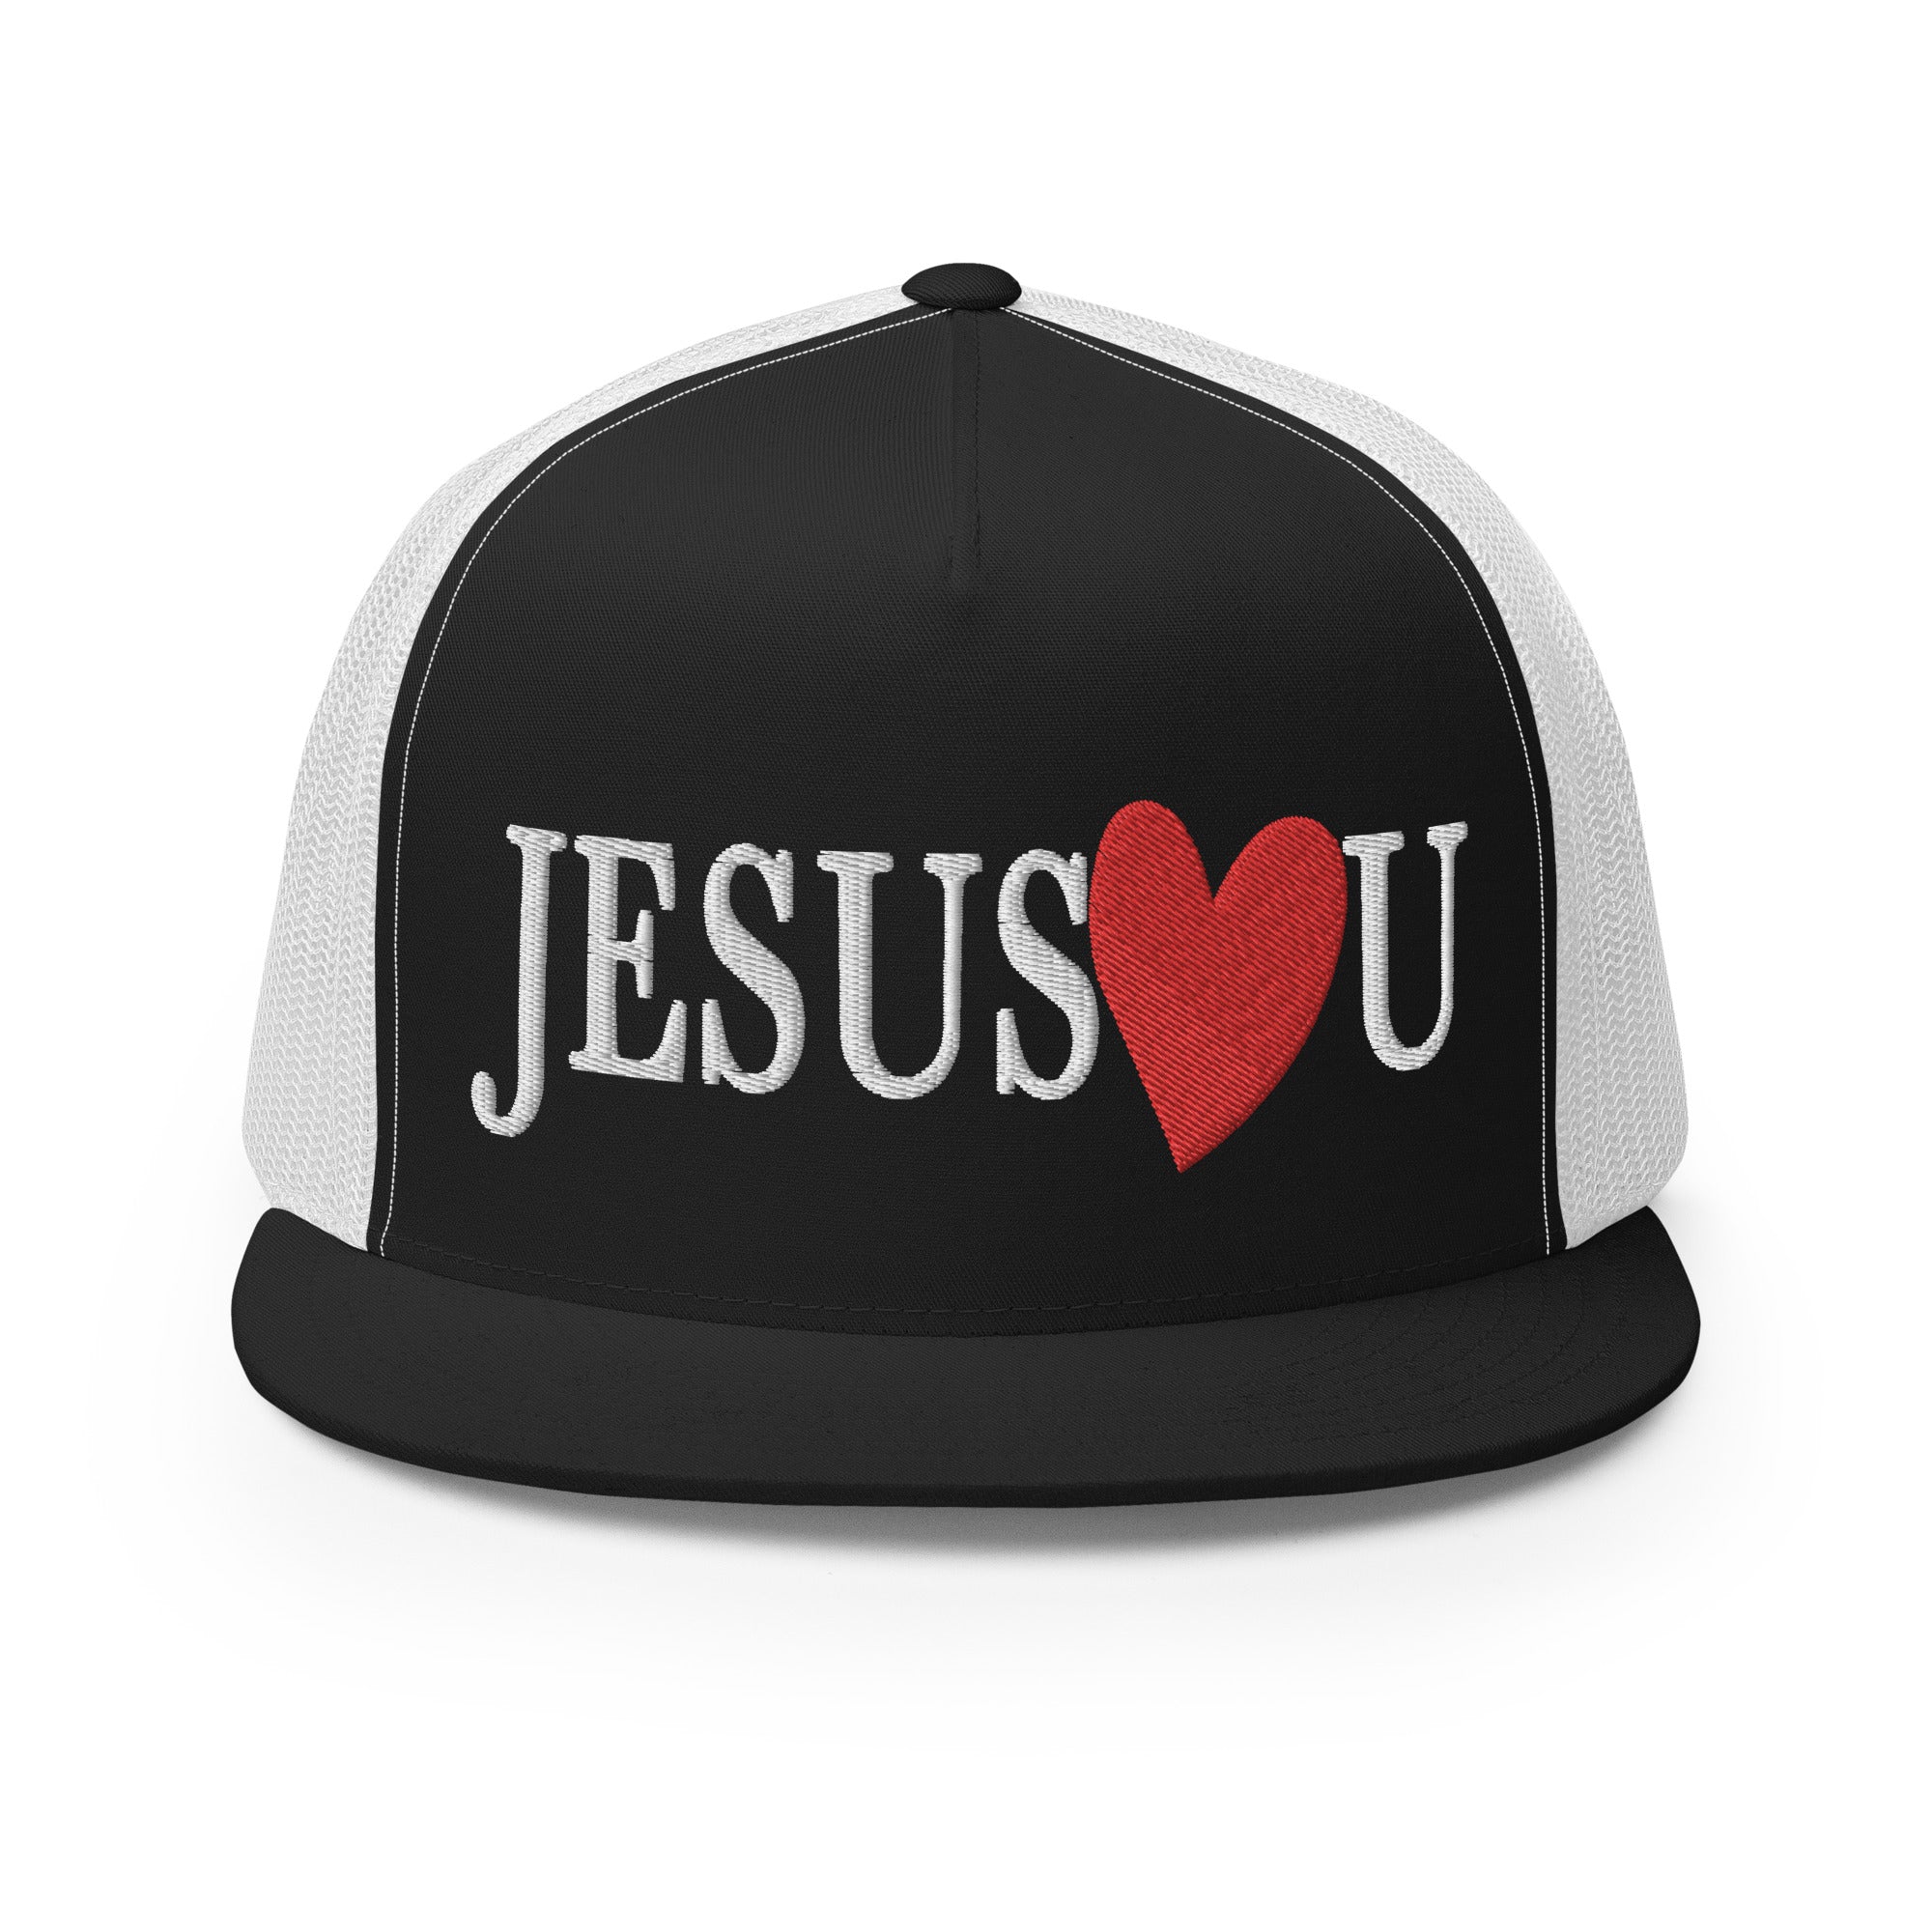 Jesus Loves You Embroidered Christian Trucker Cap